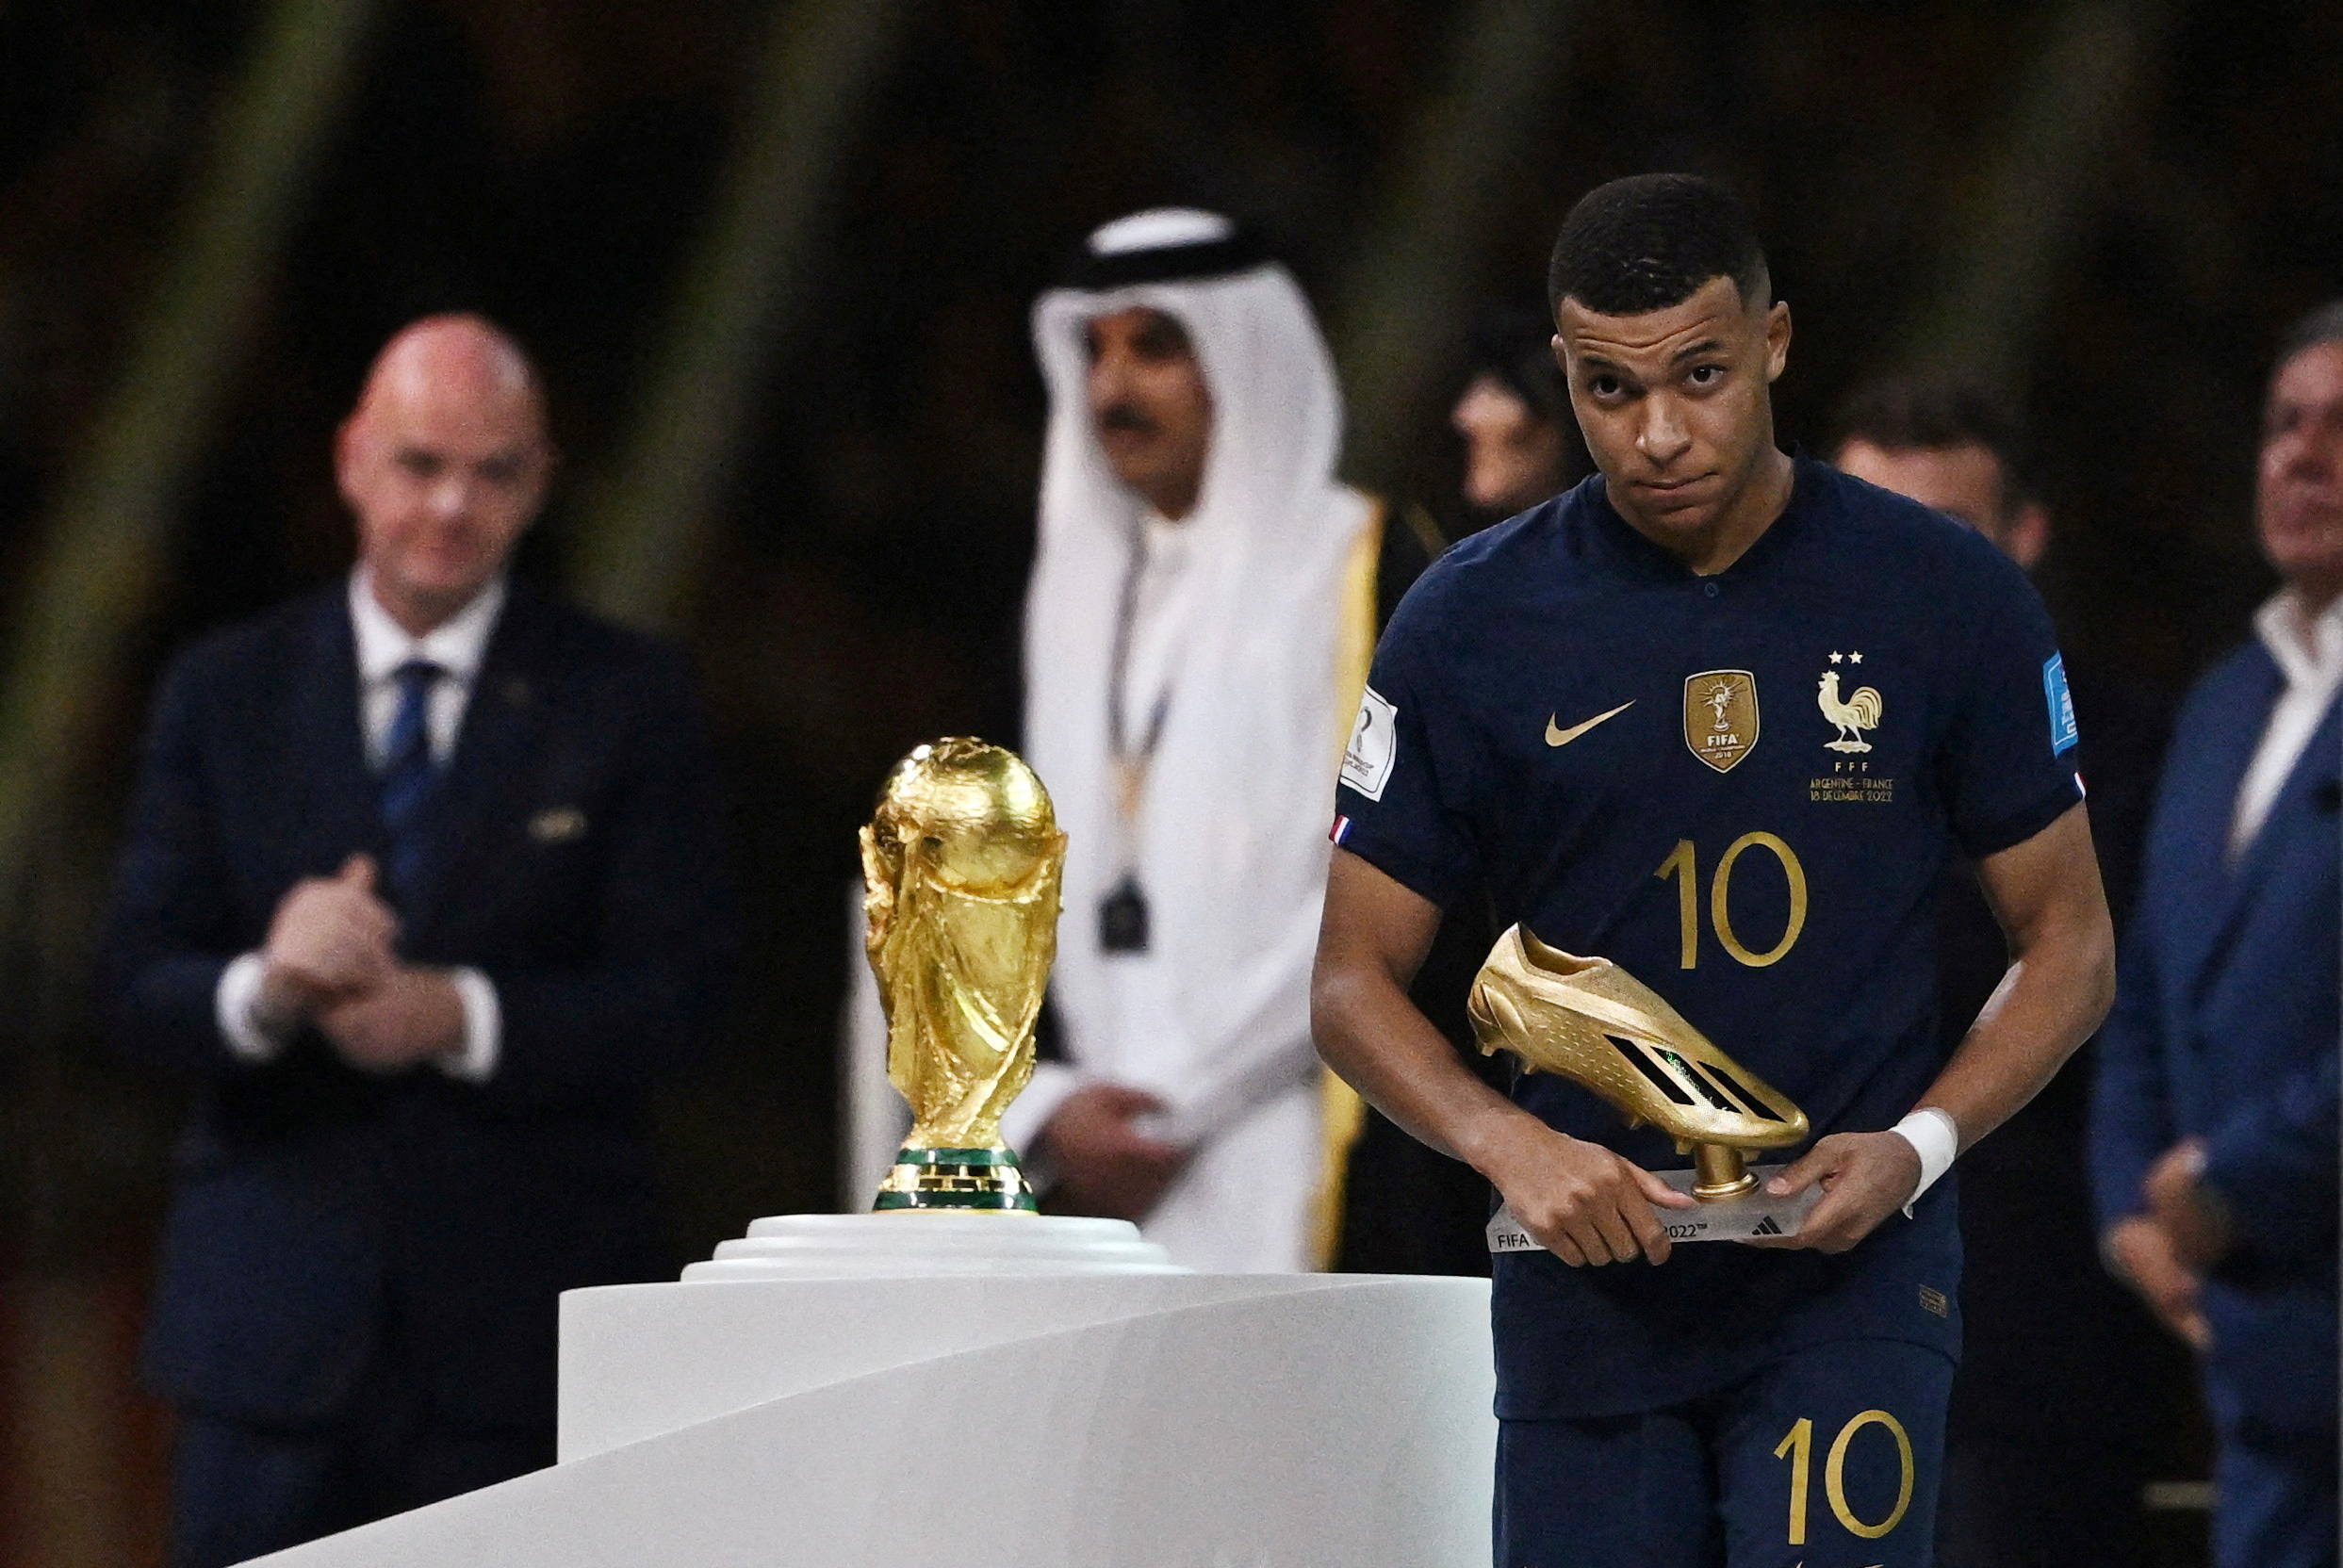 Soccer Football - FIFA World Cup Qatar 2022 - Final - Argentina v France - Lusail Stadium, Lusail, Qatar - December 18, 2022  General view of the World Cup trophy as France's Kylian Mbappe reacts after receiving the Golden Boot award REUTERS/Dylan Martinez     TPX IMAGES OF THE DAY